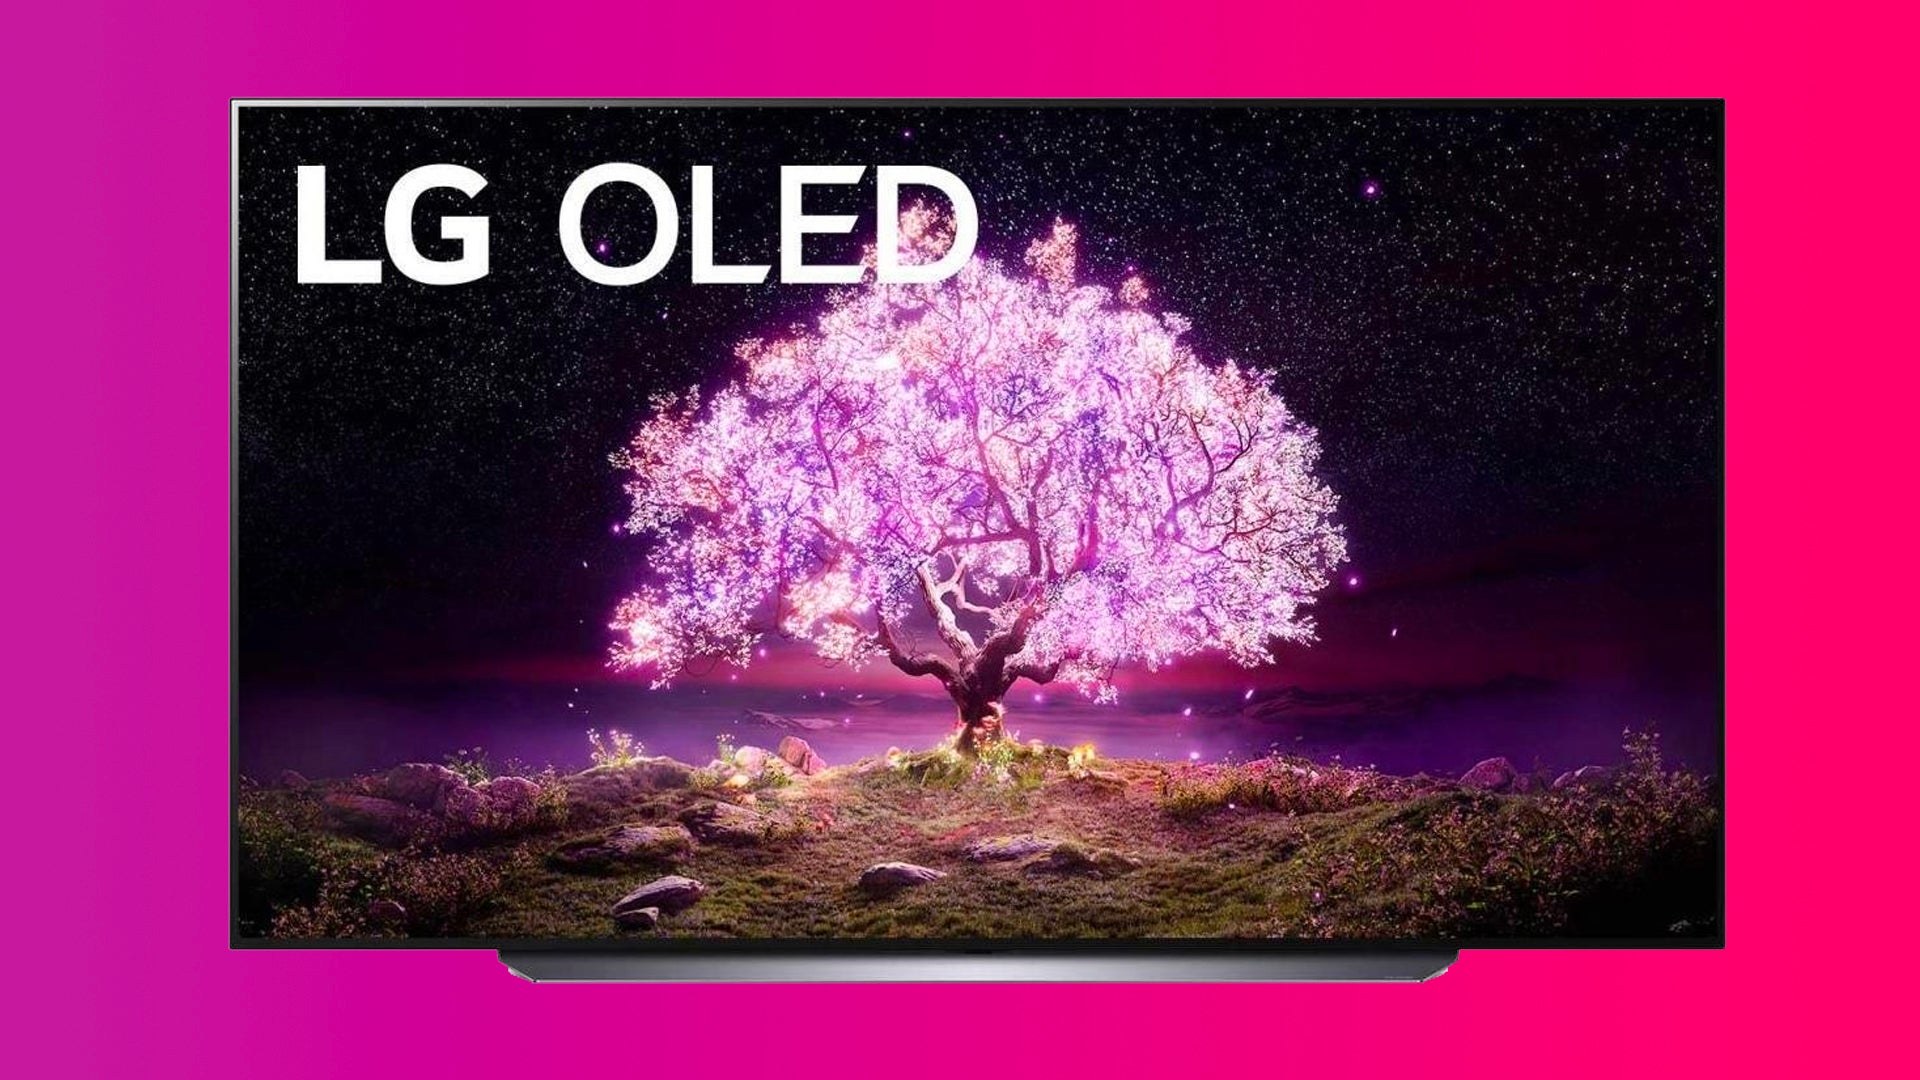 Image for Our favourite 4K TV for gaming, the LG C1 OLED, is £775 for a 55-inch model today